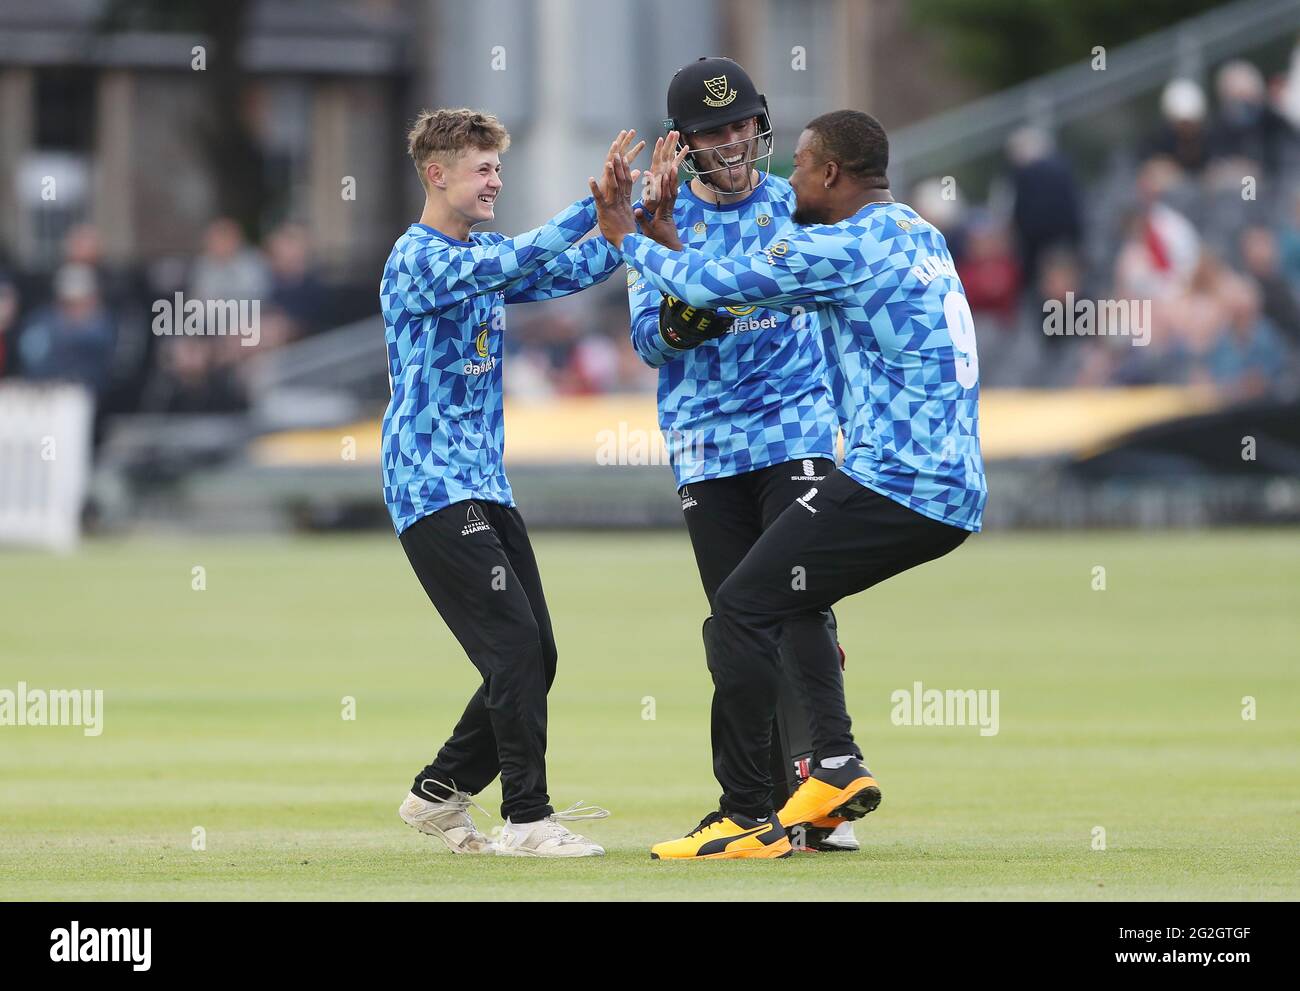 16 year old Alex Lenham of Sussex Sharks celebrates taking the wicket of  Gloucestershire's Jack Taylor